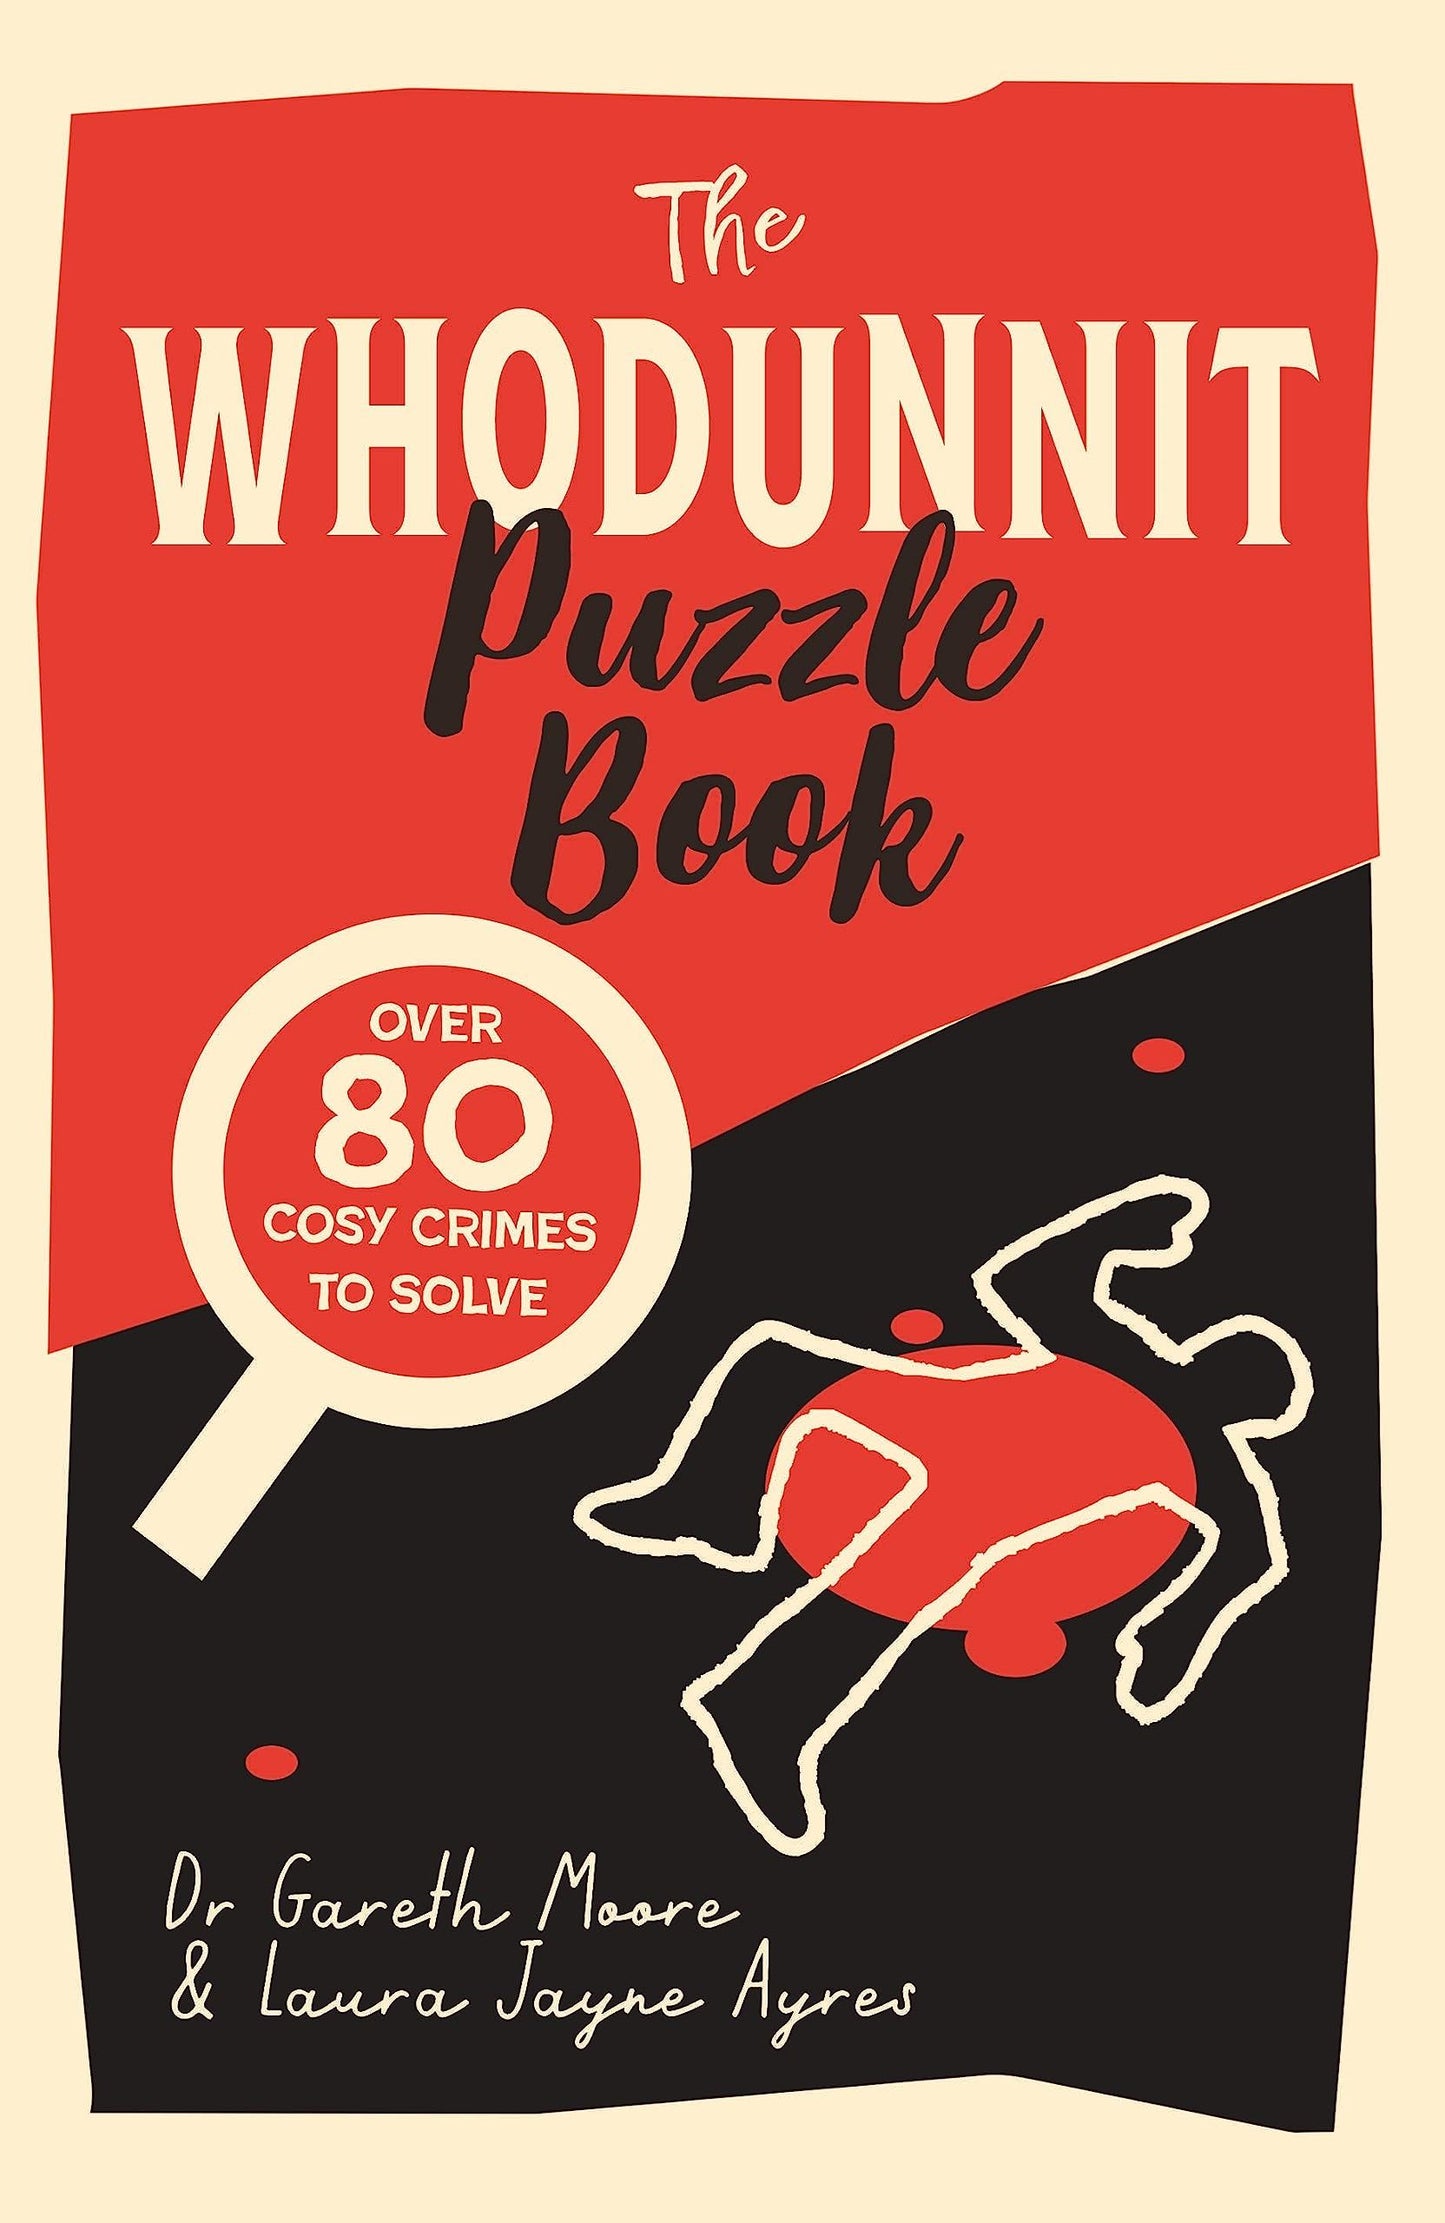 Whodunnit Puzzle Book